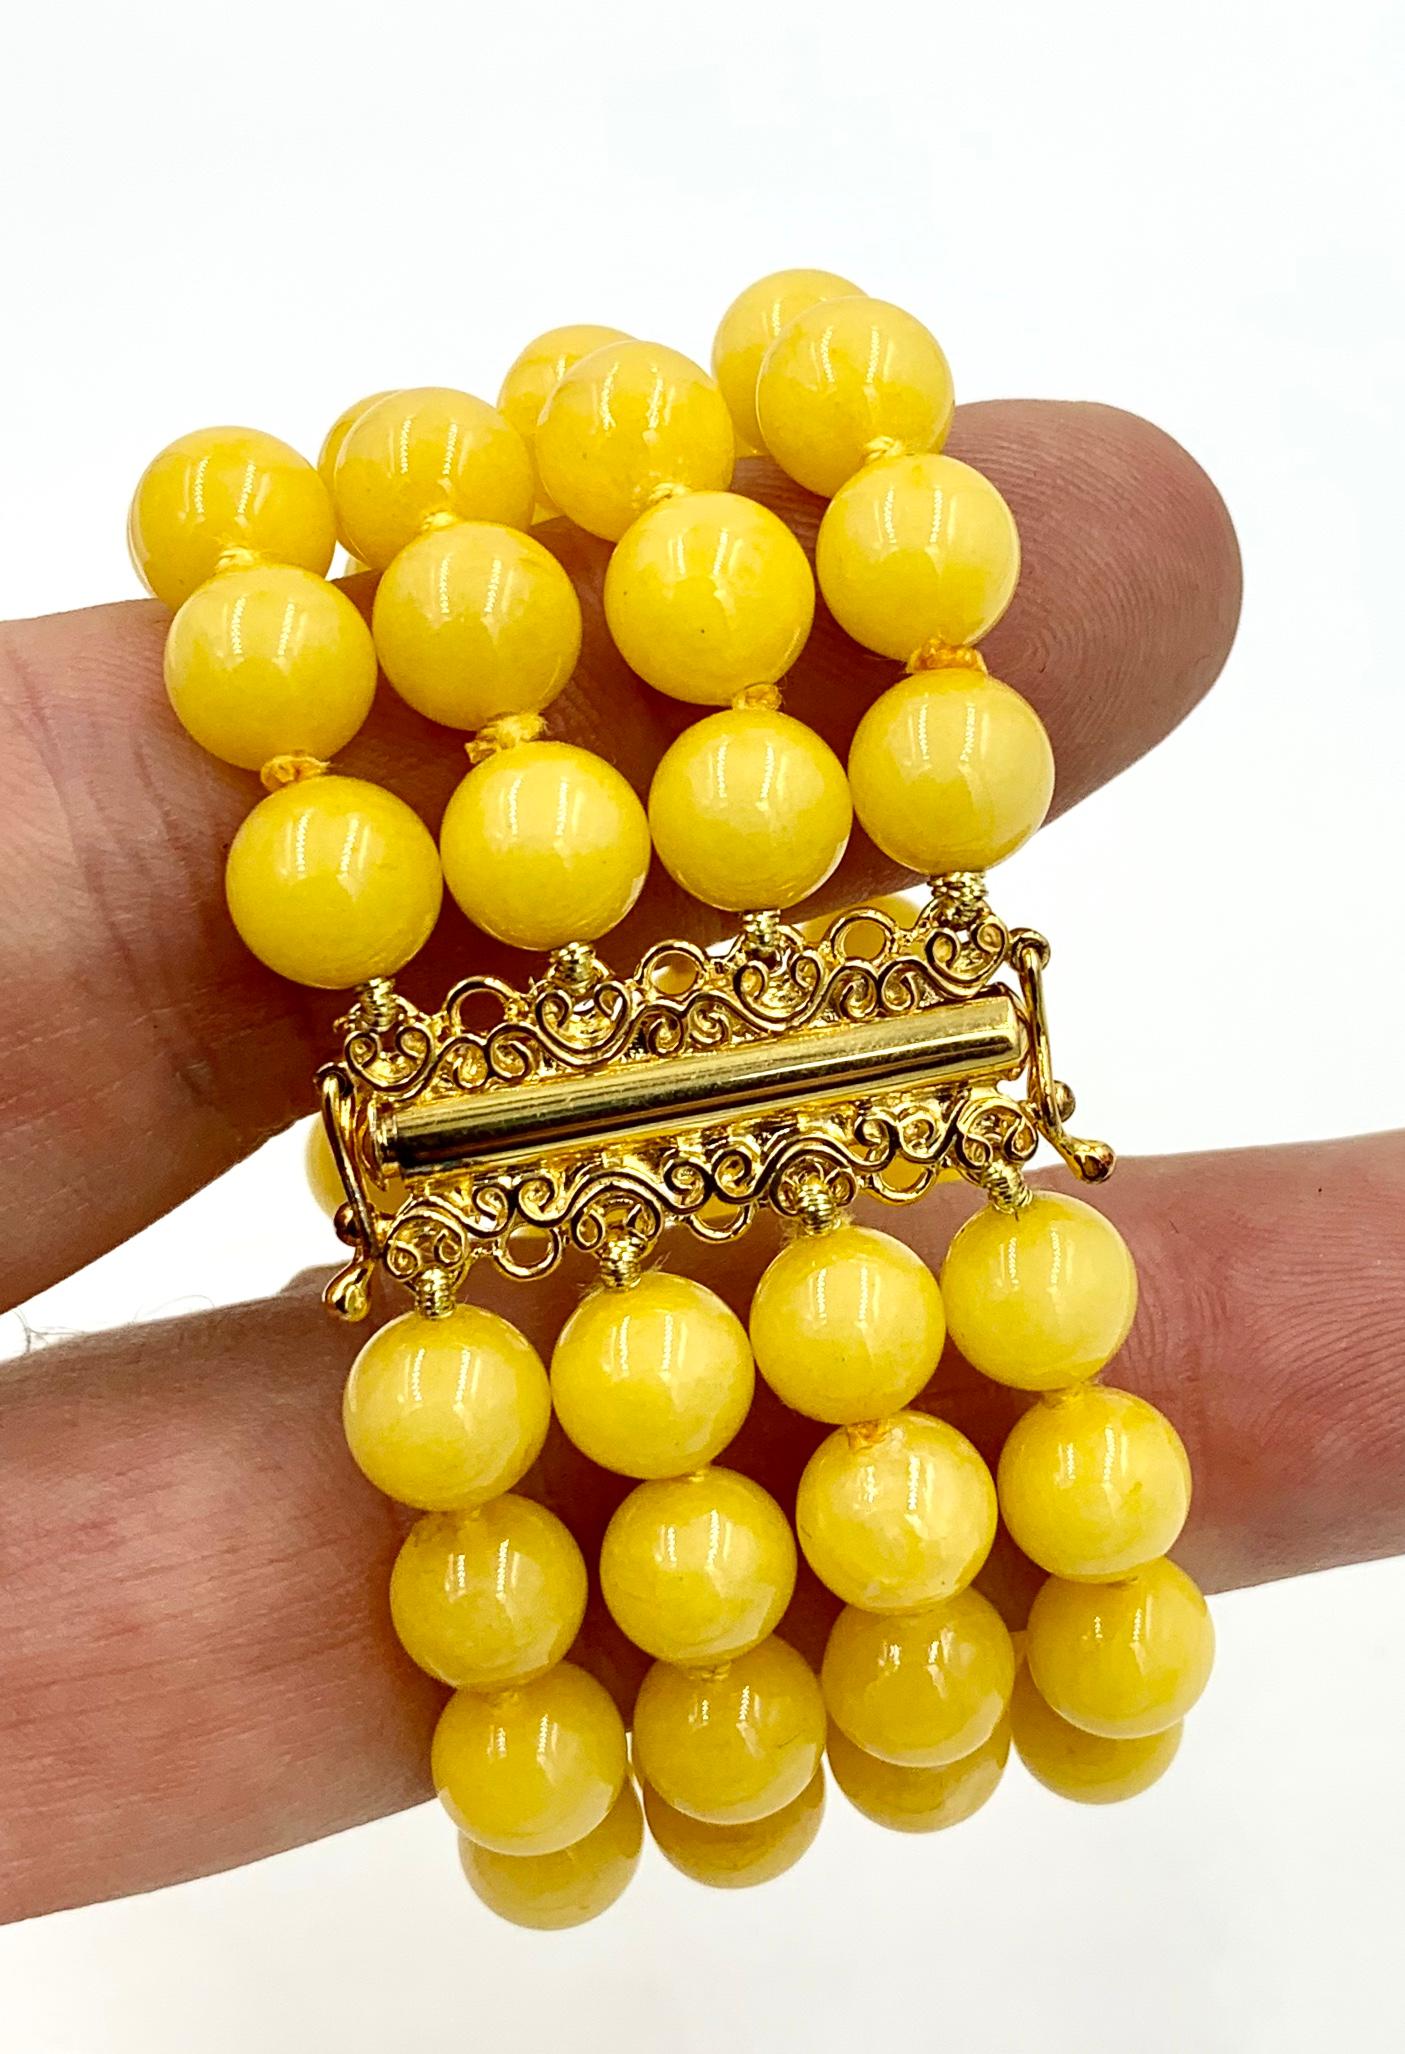 A stunning Yellow Chalcedony Bead Four Strand Bracelet with 9mm wide Chalcedony beads.  The dramatic statement bracelet with the Chalcedony beads in vivid yellow is just fabulous.  The bracelet is 6 inches long and 1 3/8 inches wide.  It has a